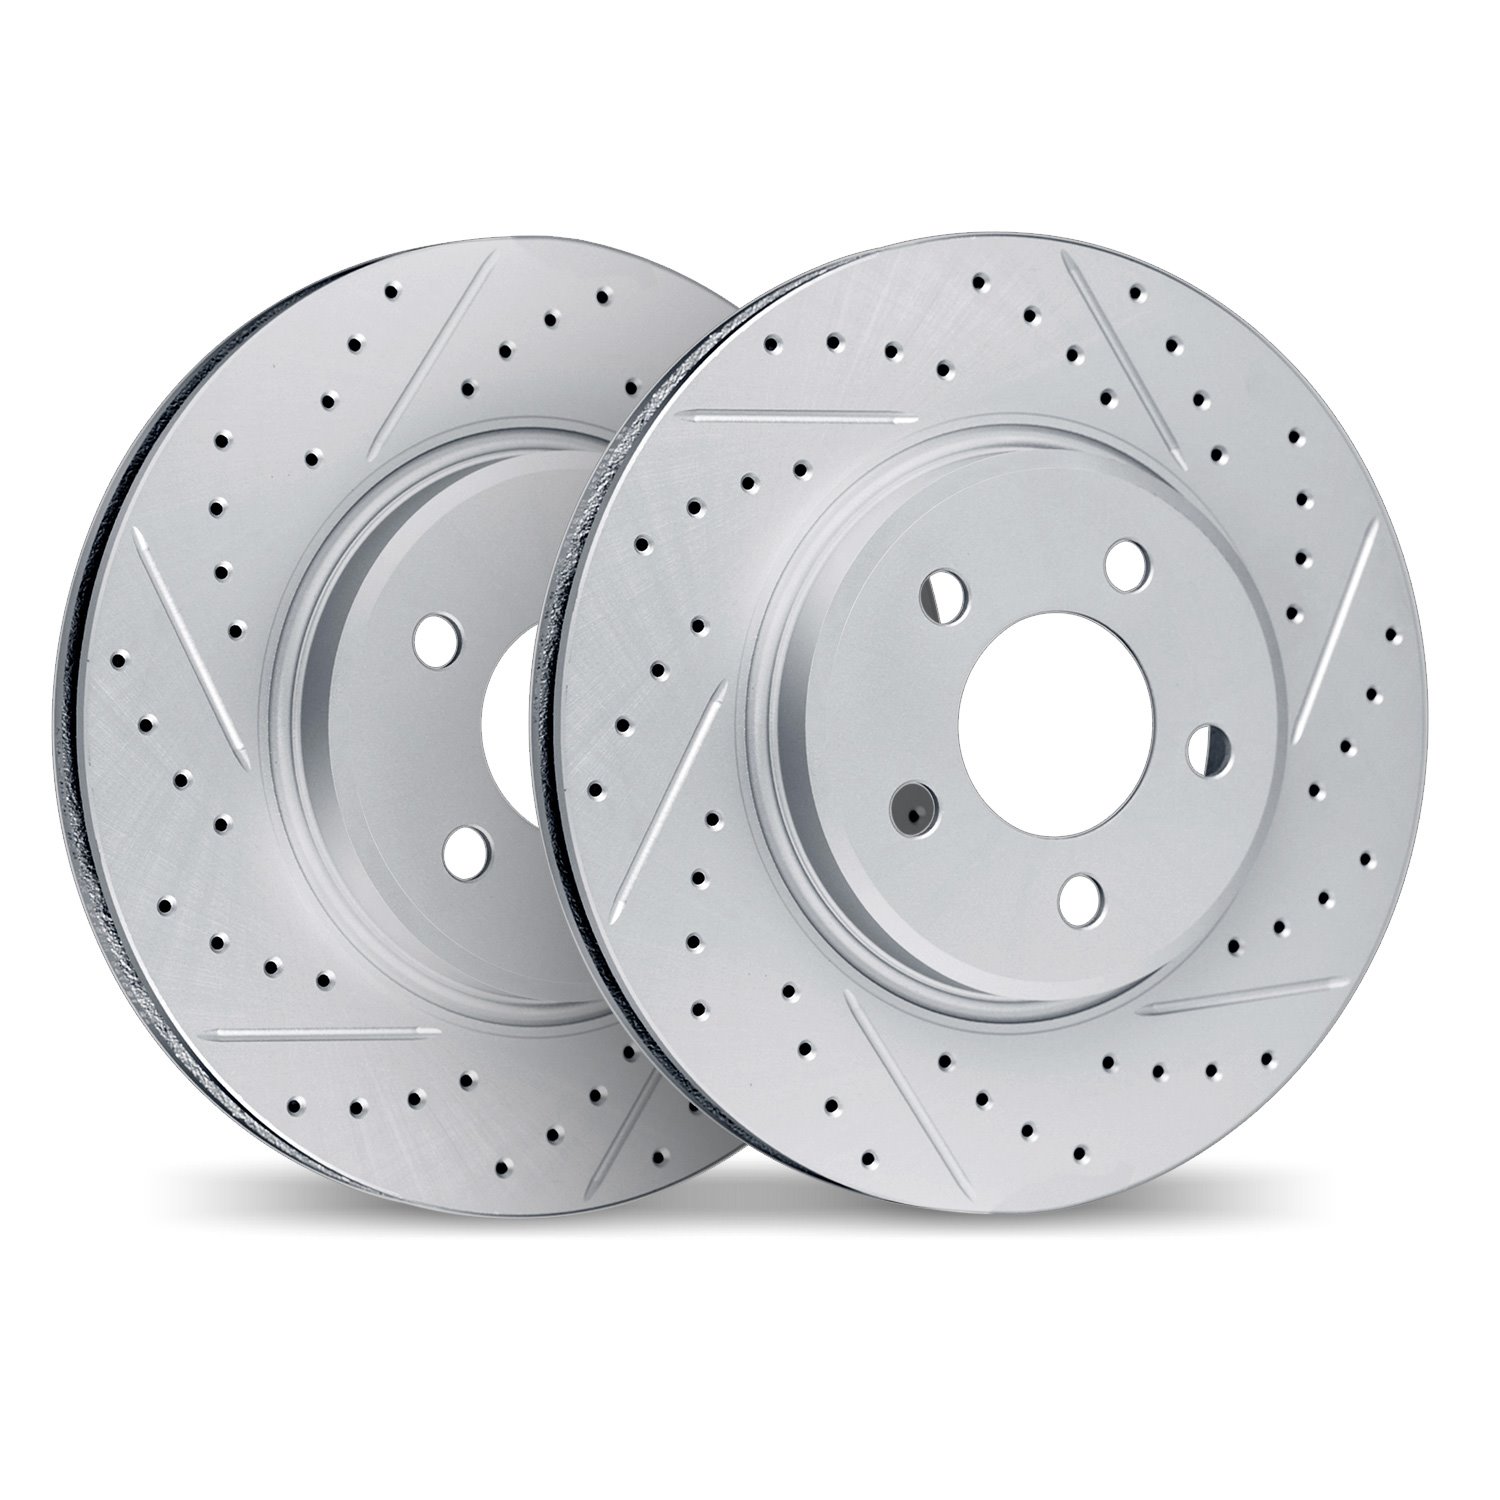 2002-31096 Geoperformance Drilled/Slotted Brake Rotors, 2010-2014 BMW, Position: Rear